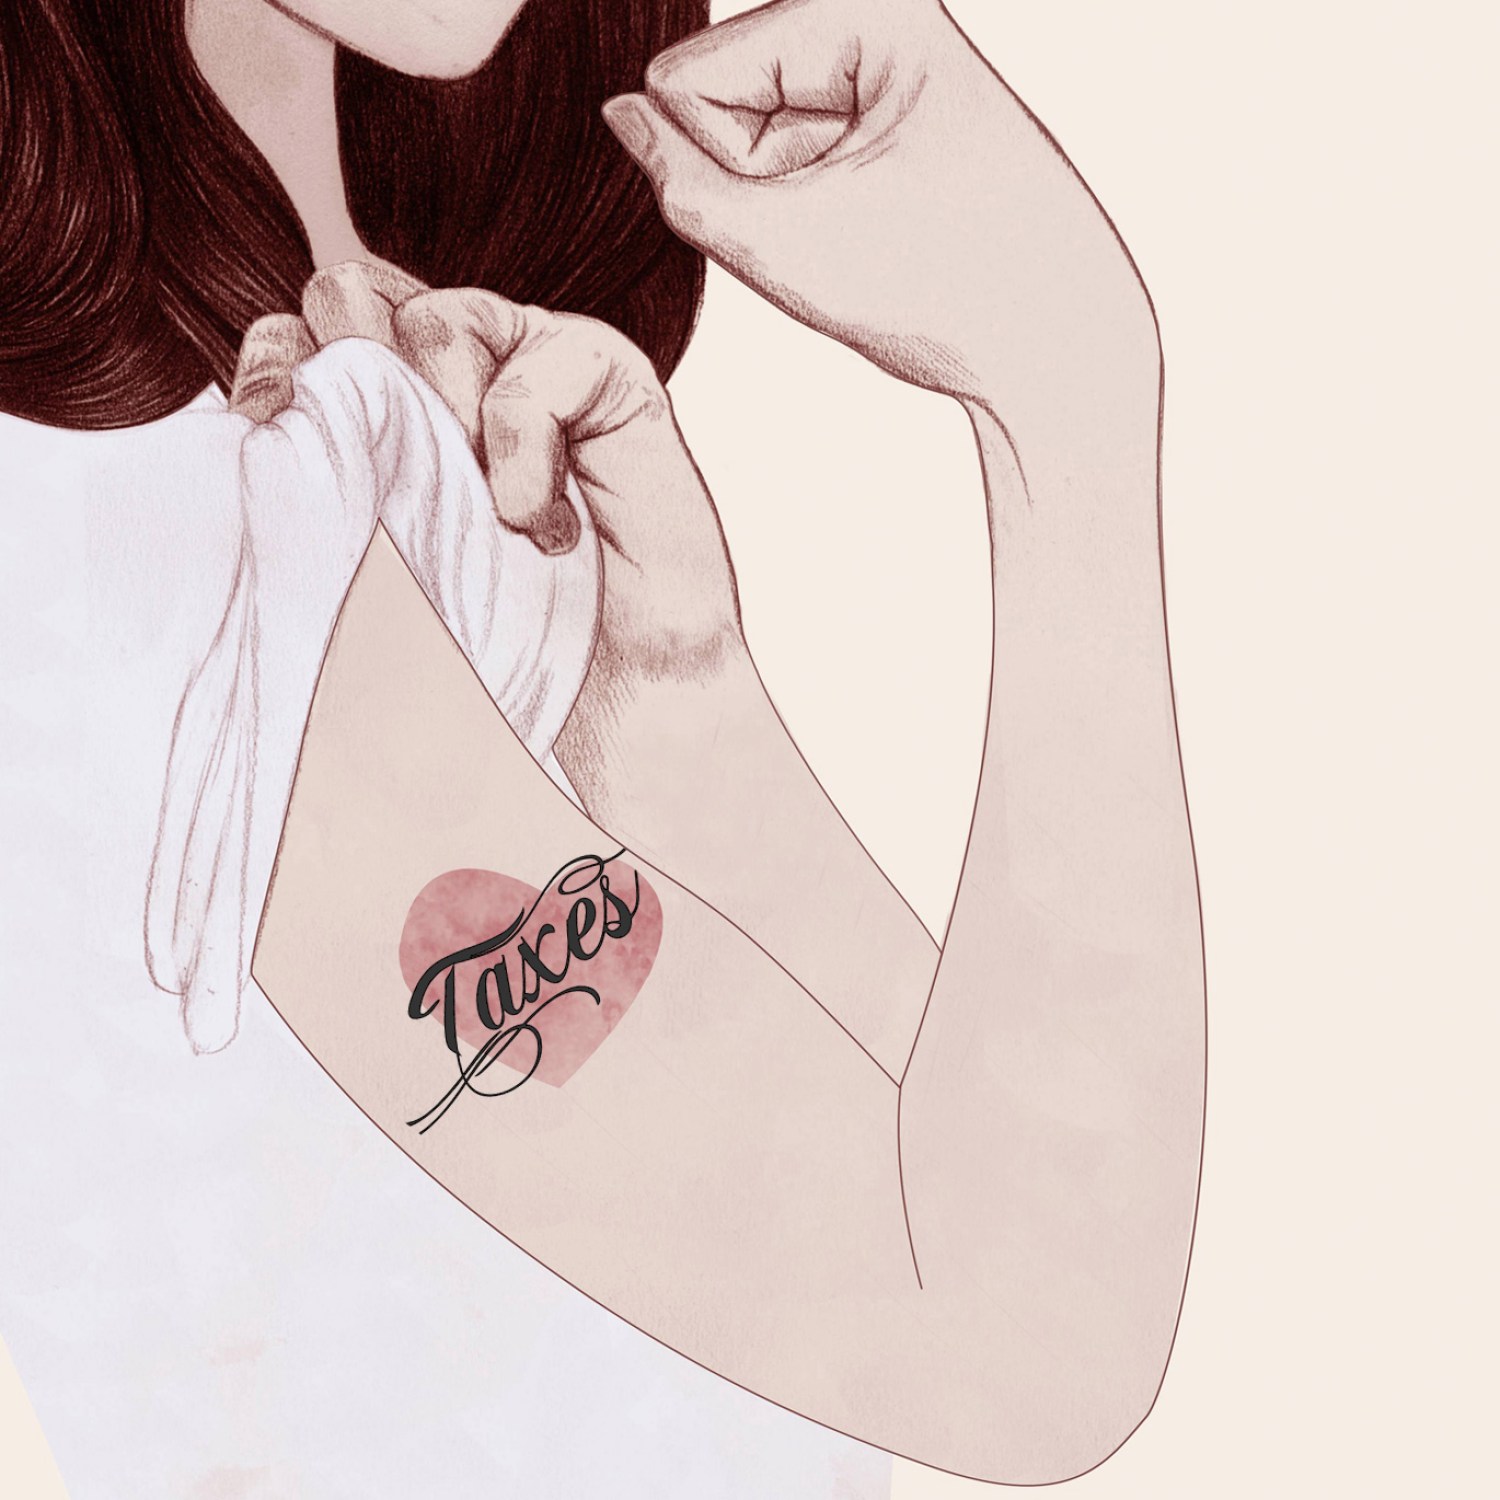 Illustration of woman with a taxes tattoo